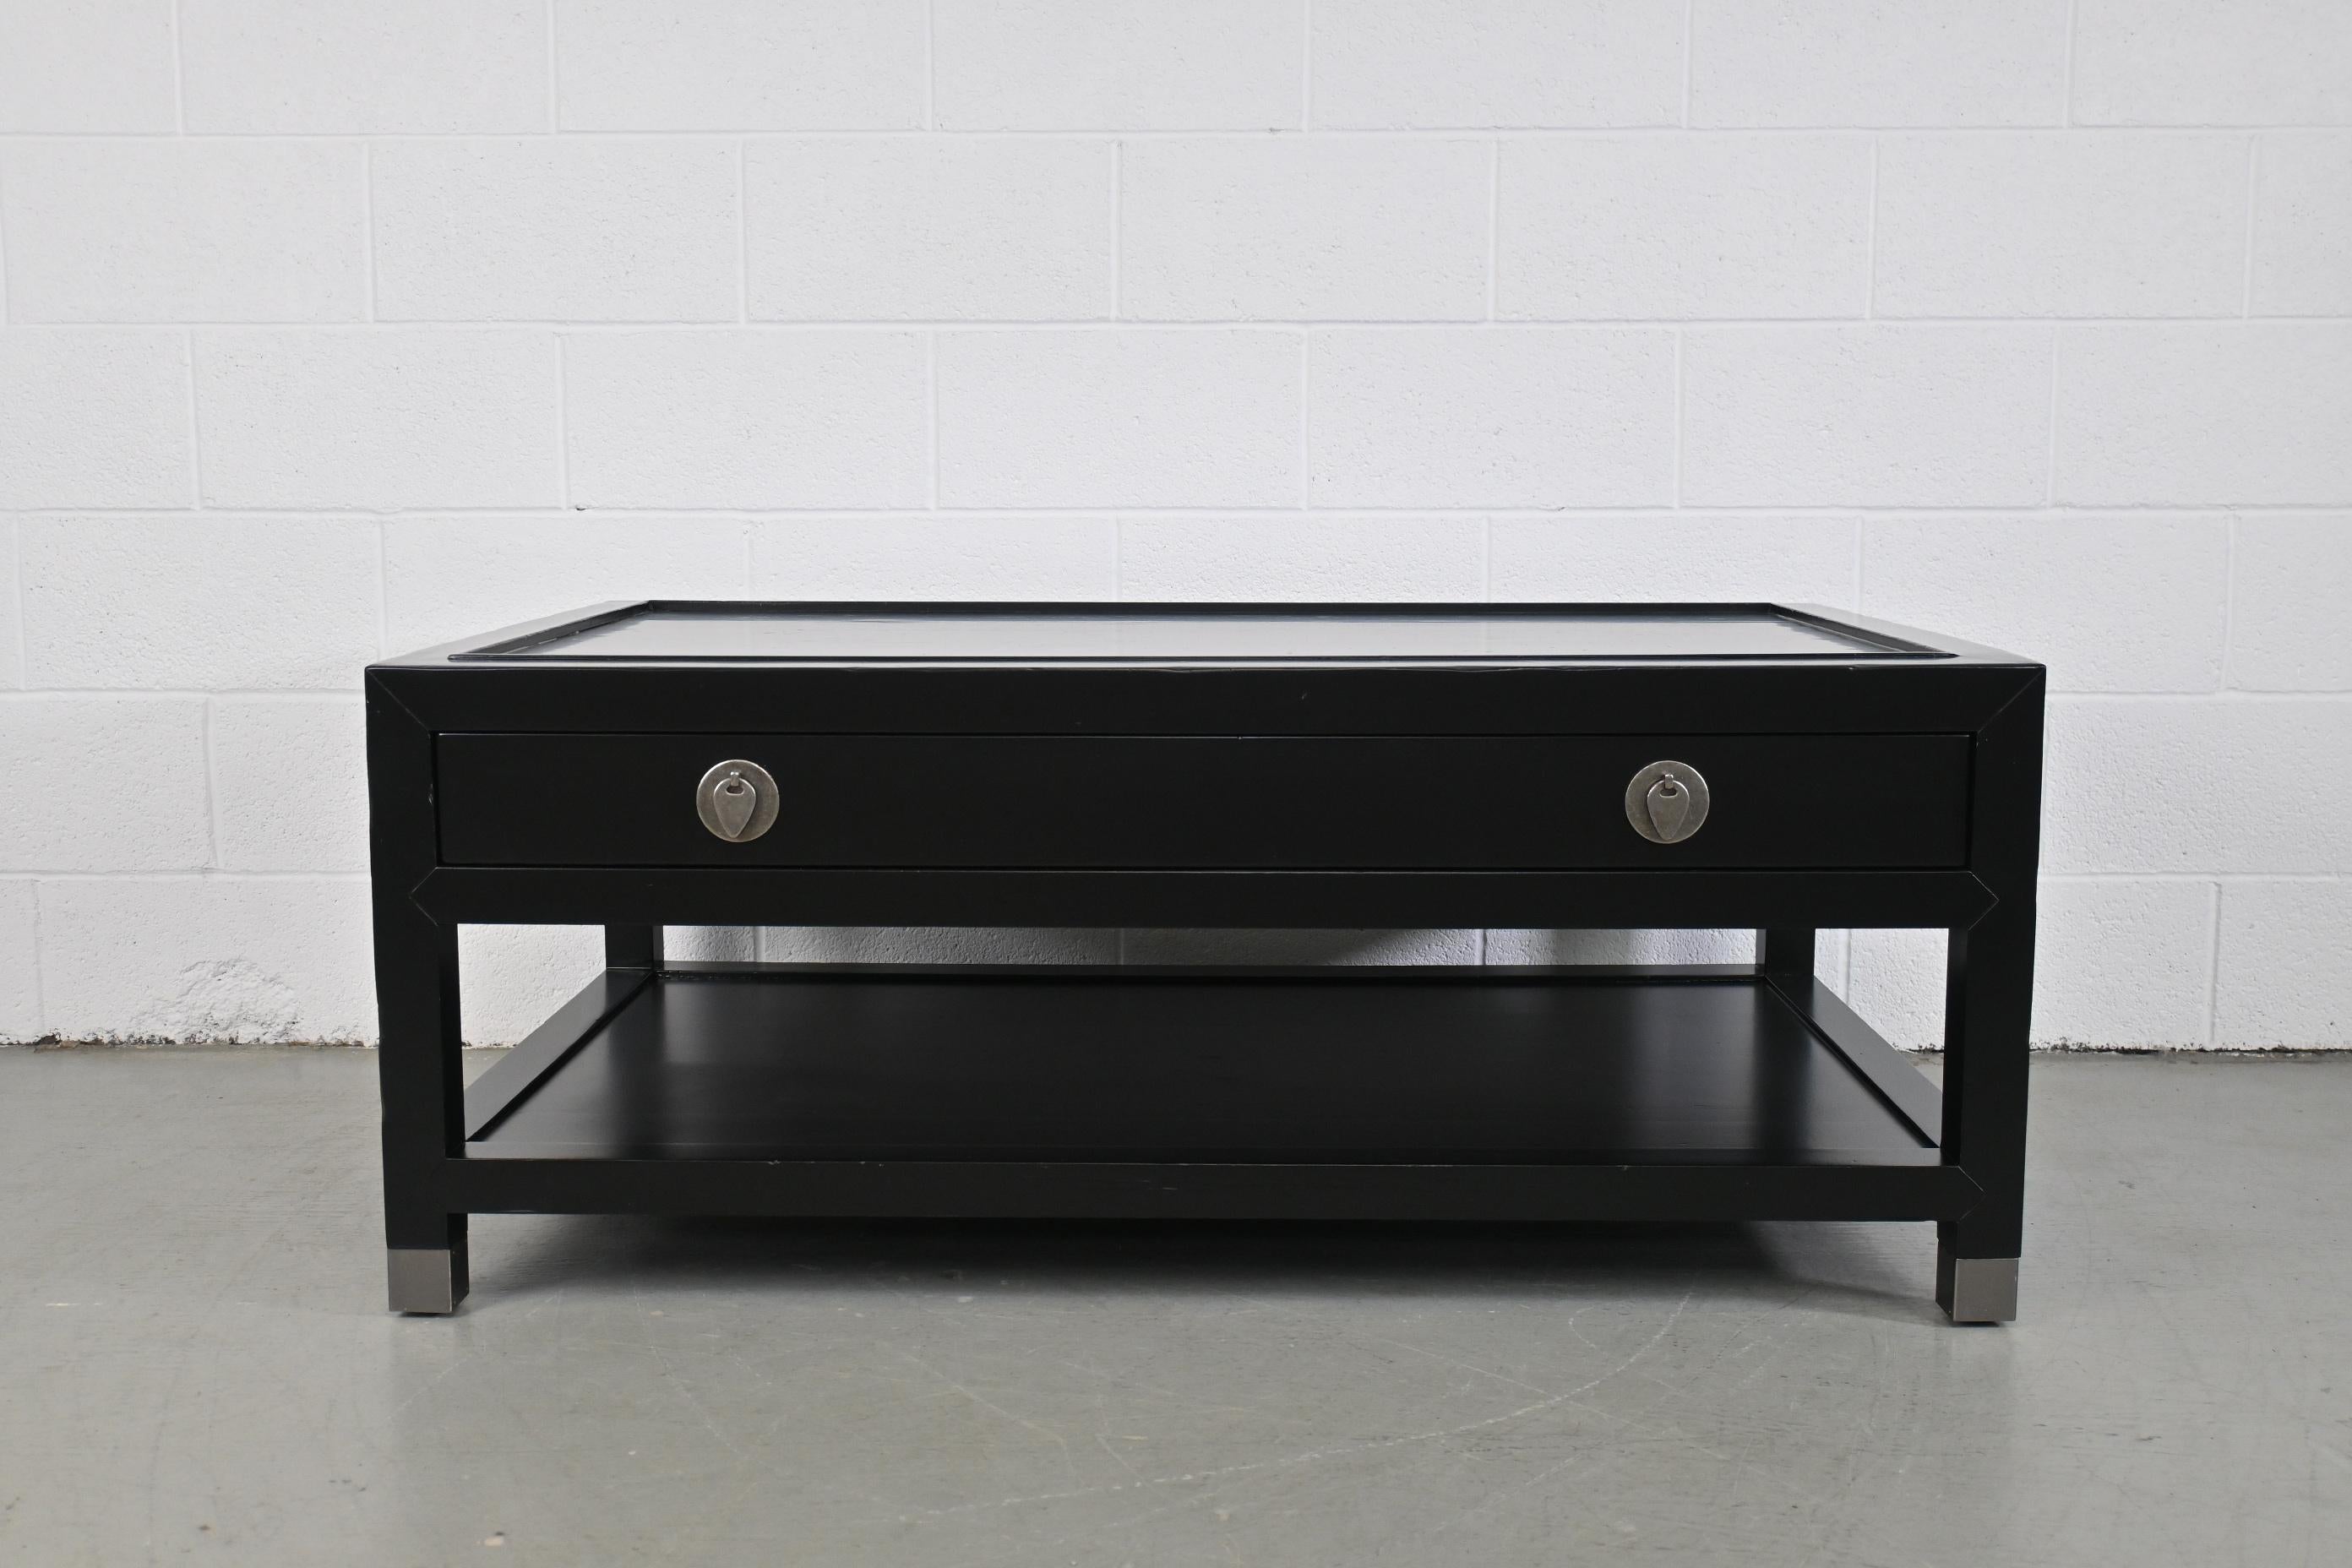 Milling Road Baker Furniture Black Lacquered coffee table.

Baker Furniture, USA, 1990s.

Measures: 50 wide x 30 deep x 20.25 high.

Black lacquered purposefully distressed coffee table with single drawer and brushed silver